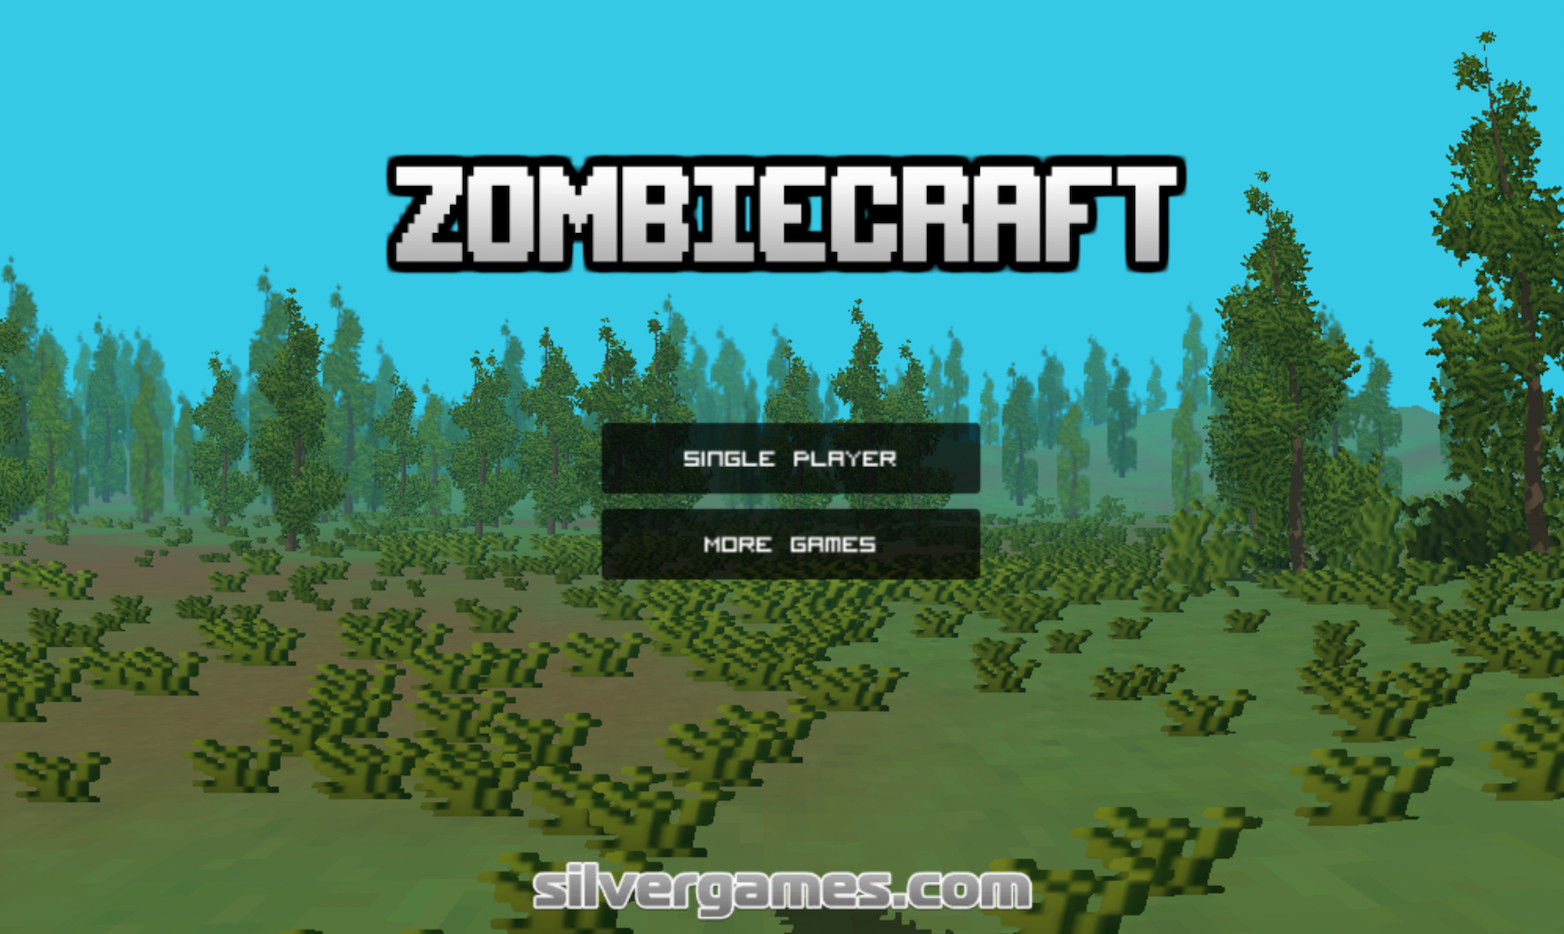 zombie survival crafting game